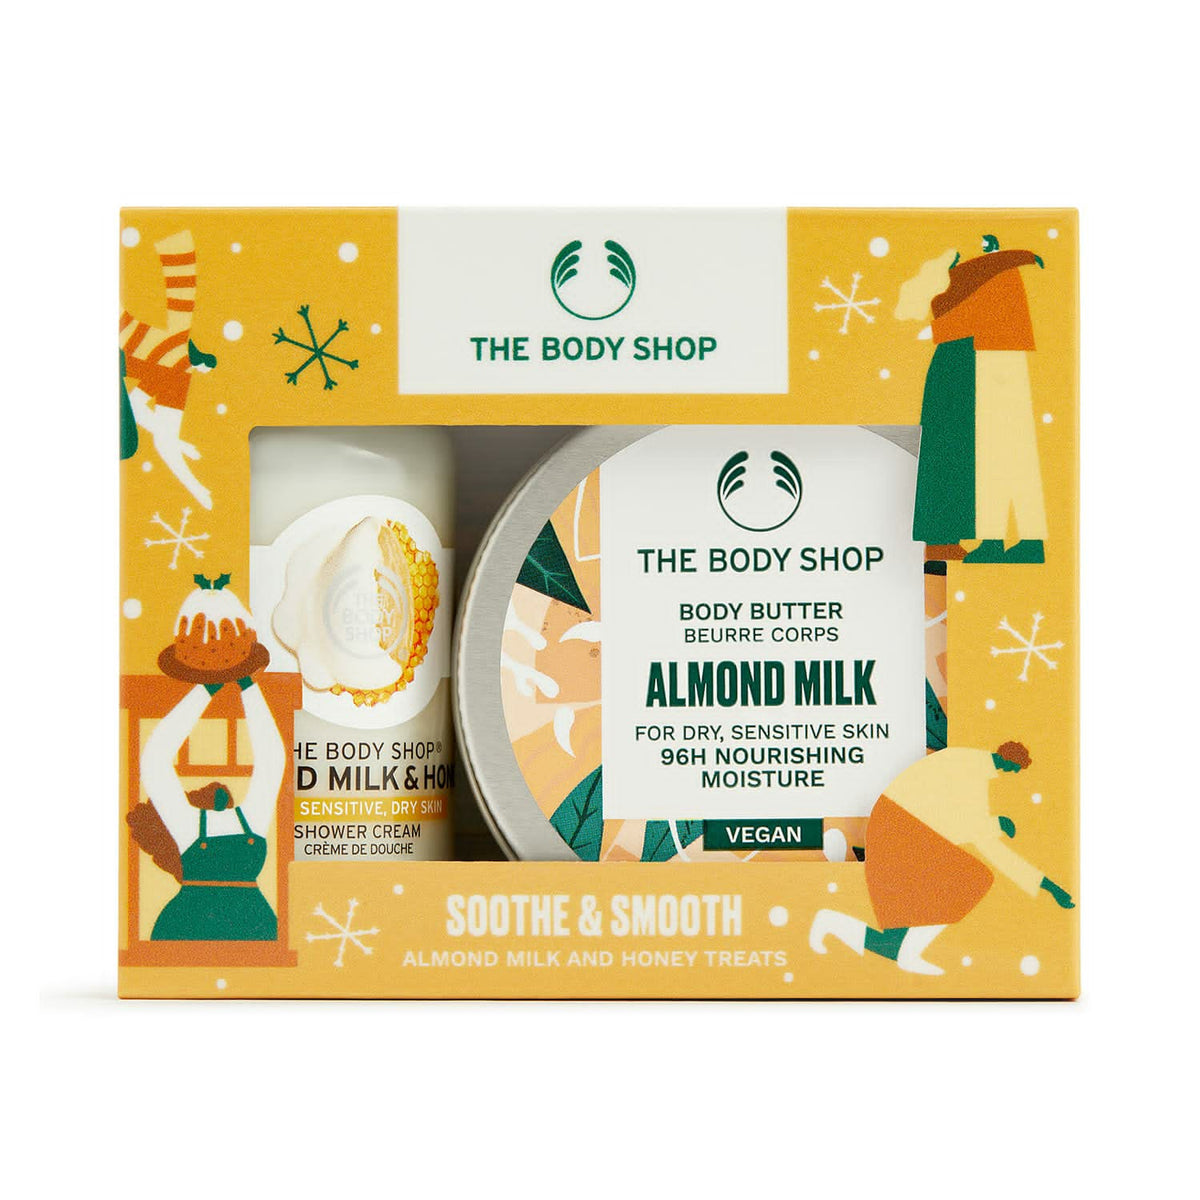 The Body Shop Soothe & Smooth Almond Milk & Honey Treats Gift Set